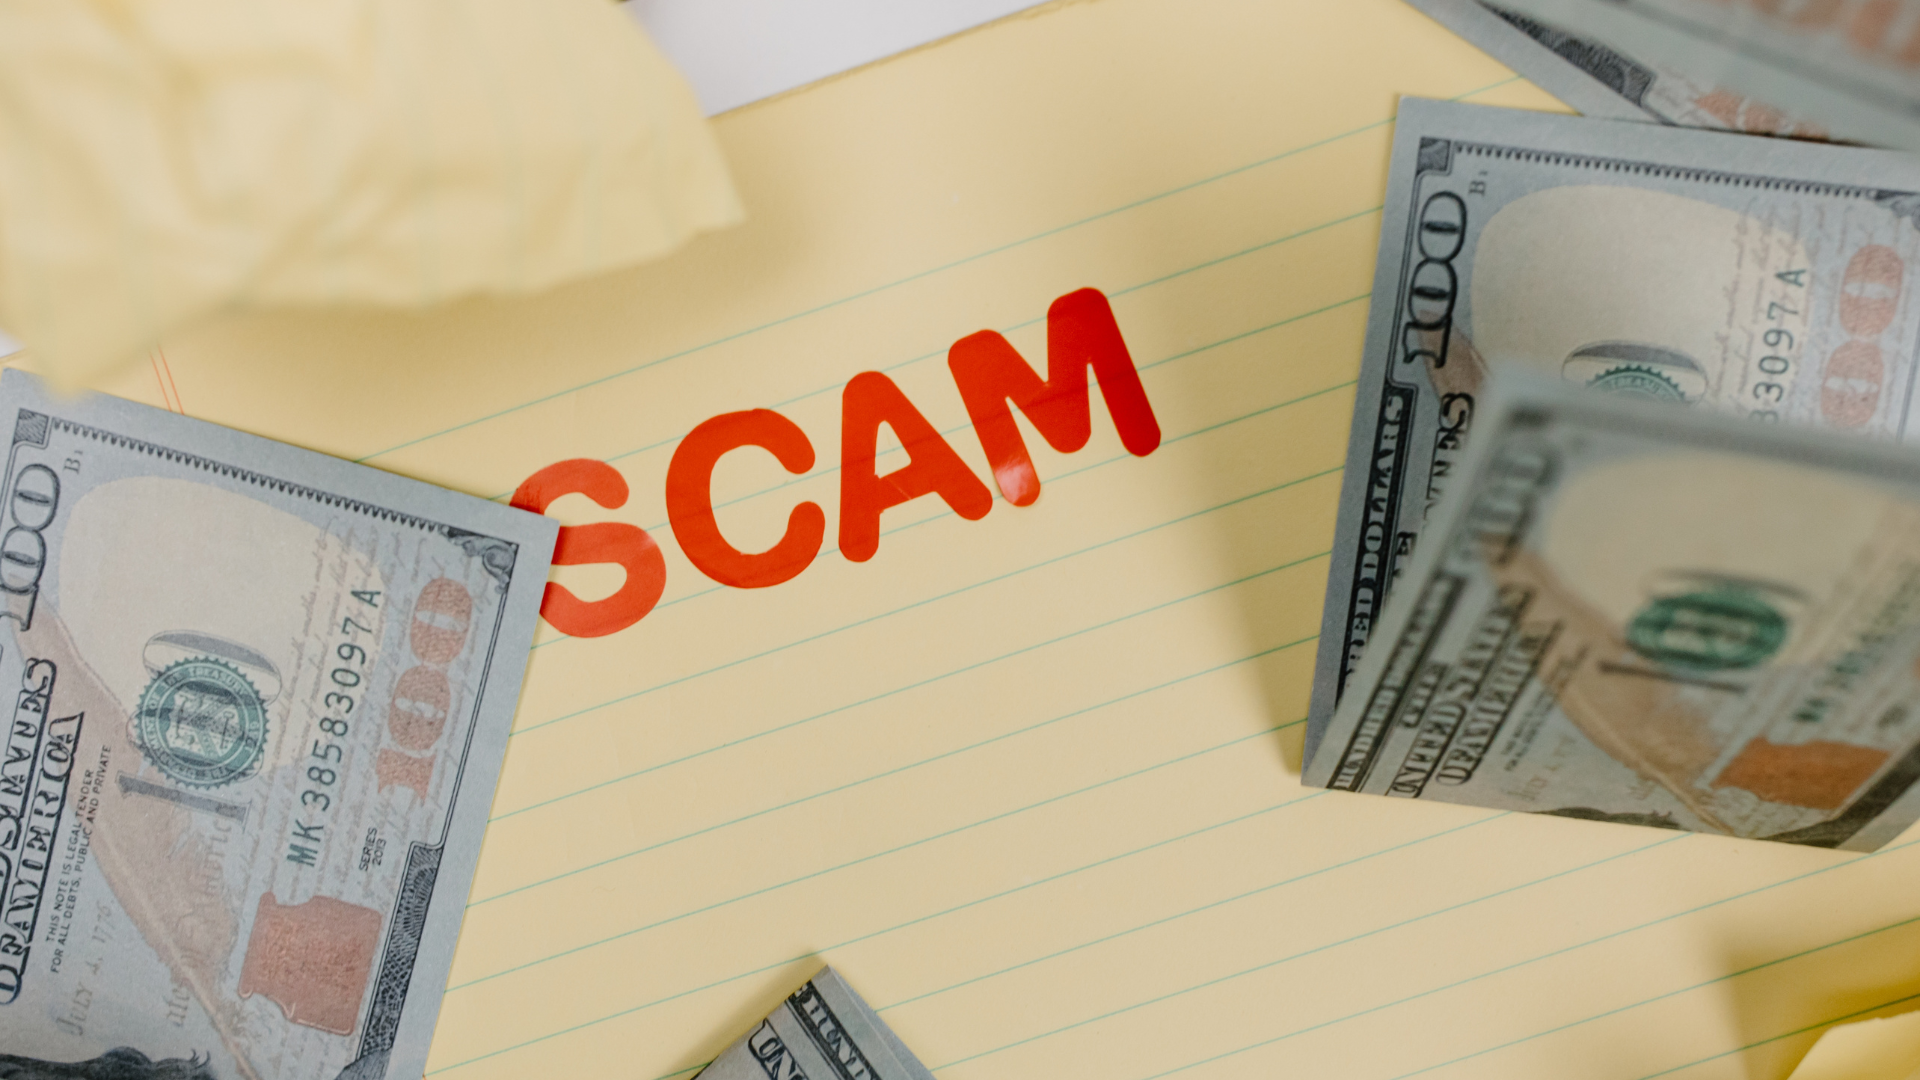 How To Avoid DOT Compliance Related Scams